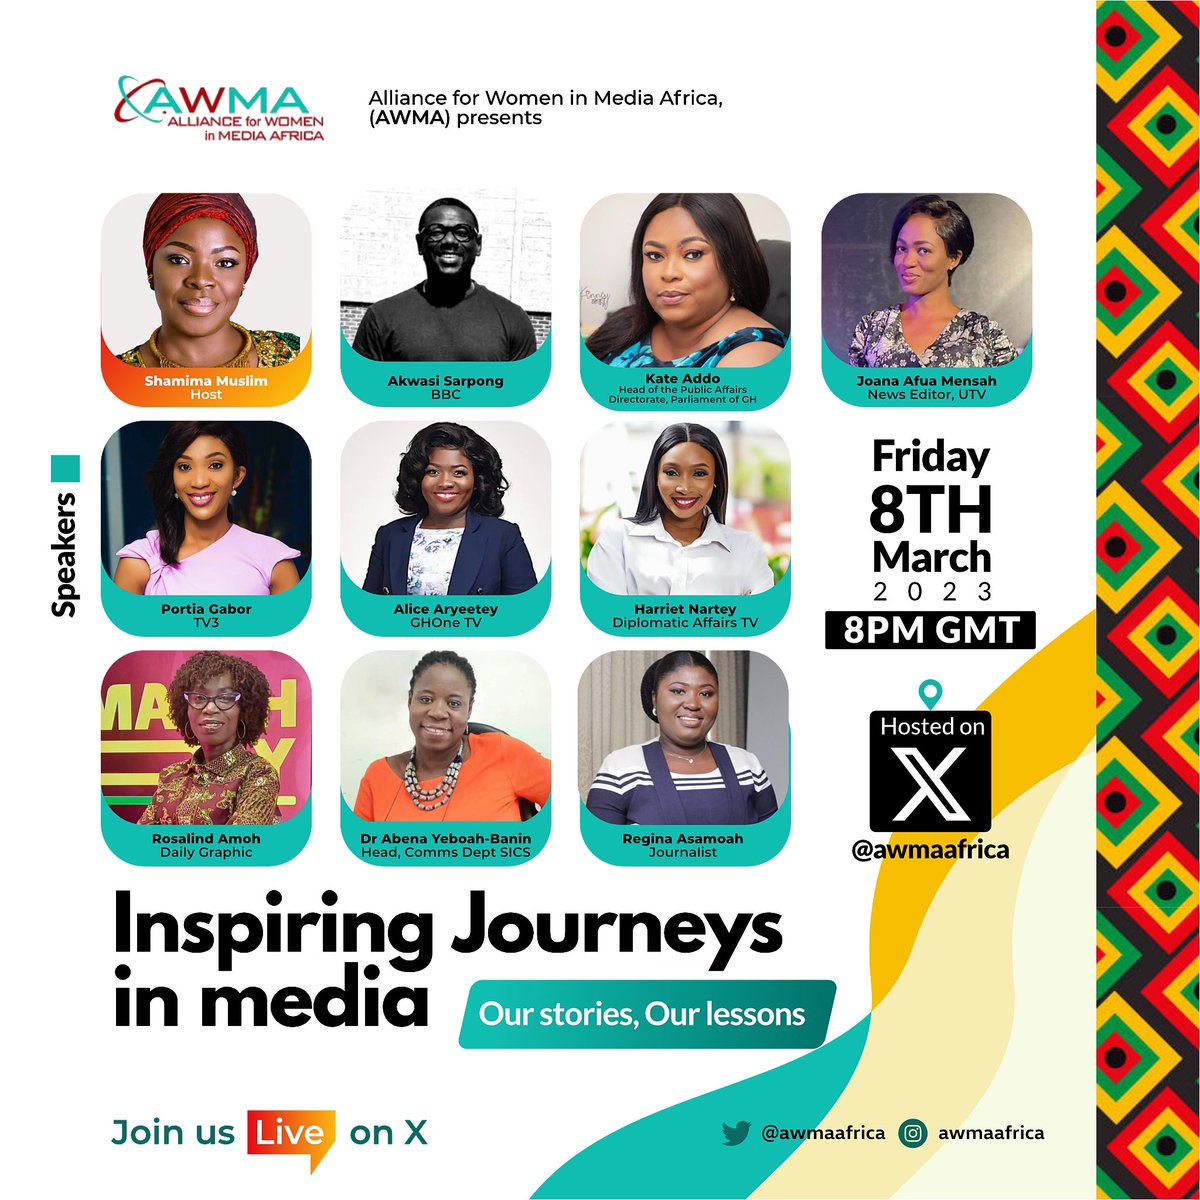 x.com/awmaafrica/sta… All is set for our IWD conversation on X. We want to inspire more journeys in media by sharing stories and lessons from those charting creative, consistent paths… join us on Fri the 8th of March at 8pm GMT…@awmaafrica .